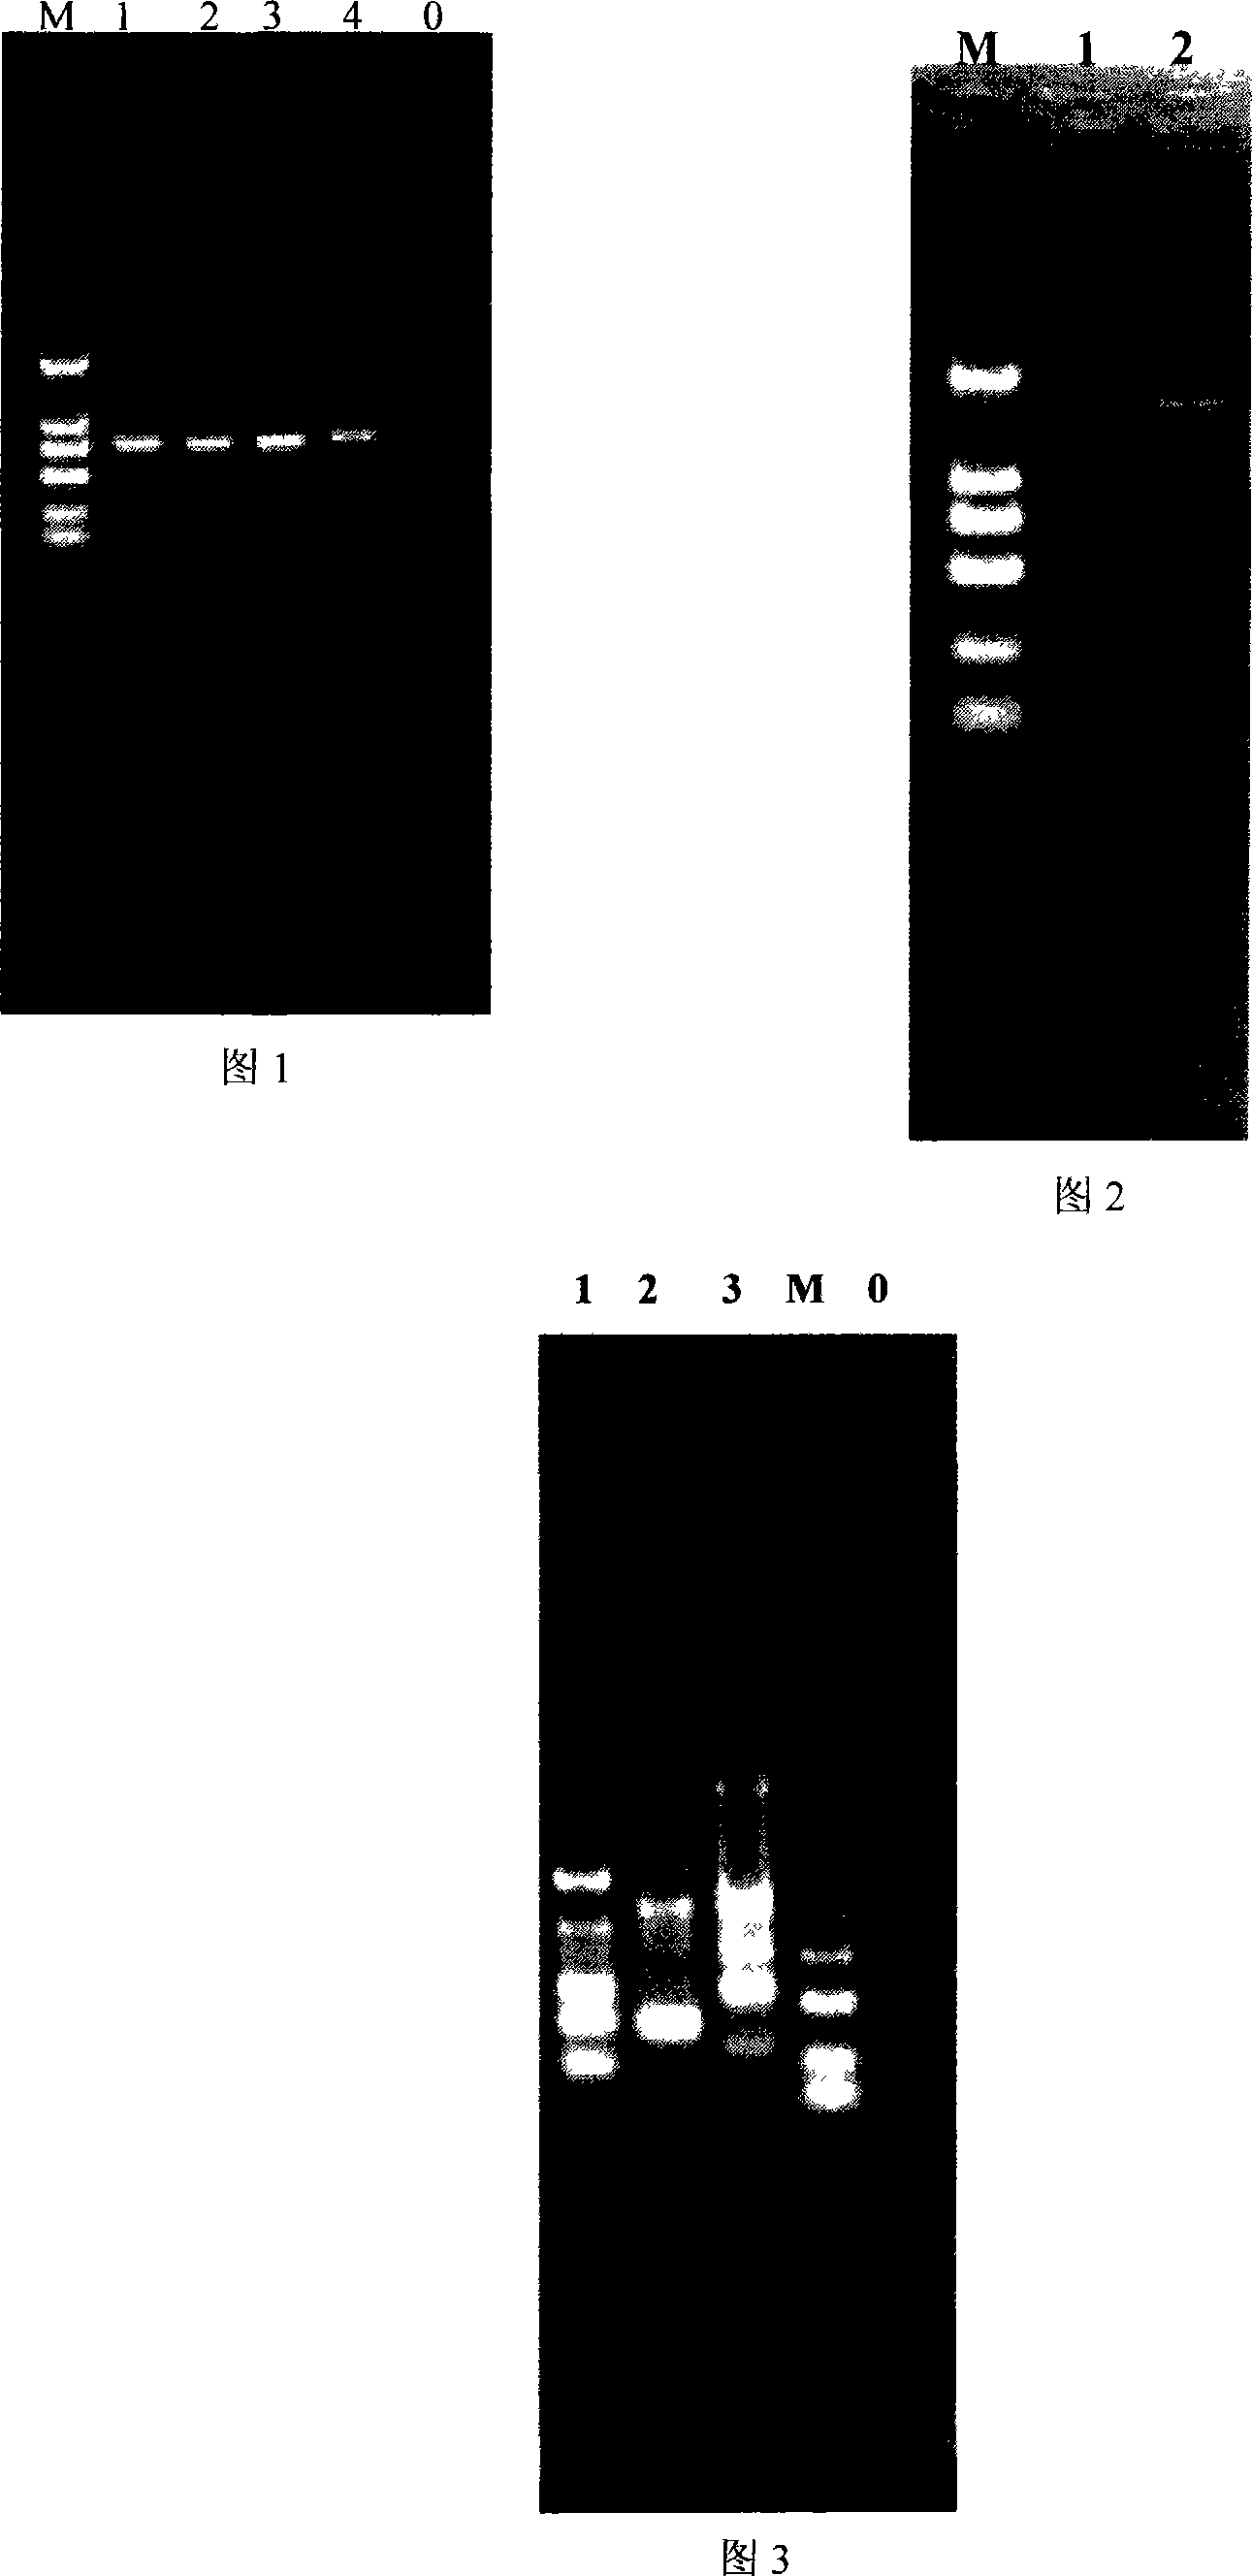 Method for processing DNA mould and improving DNA expansion efficiency by using restriction enzymes